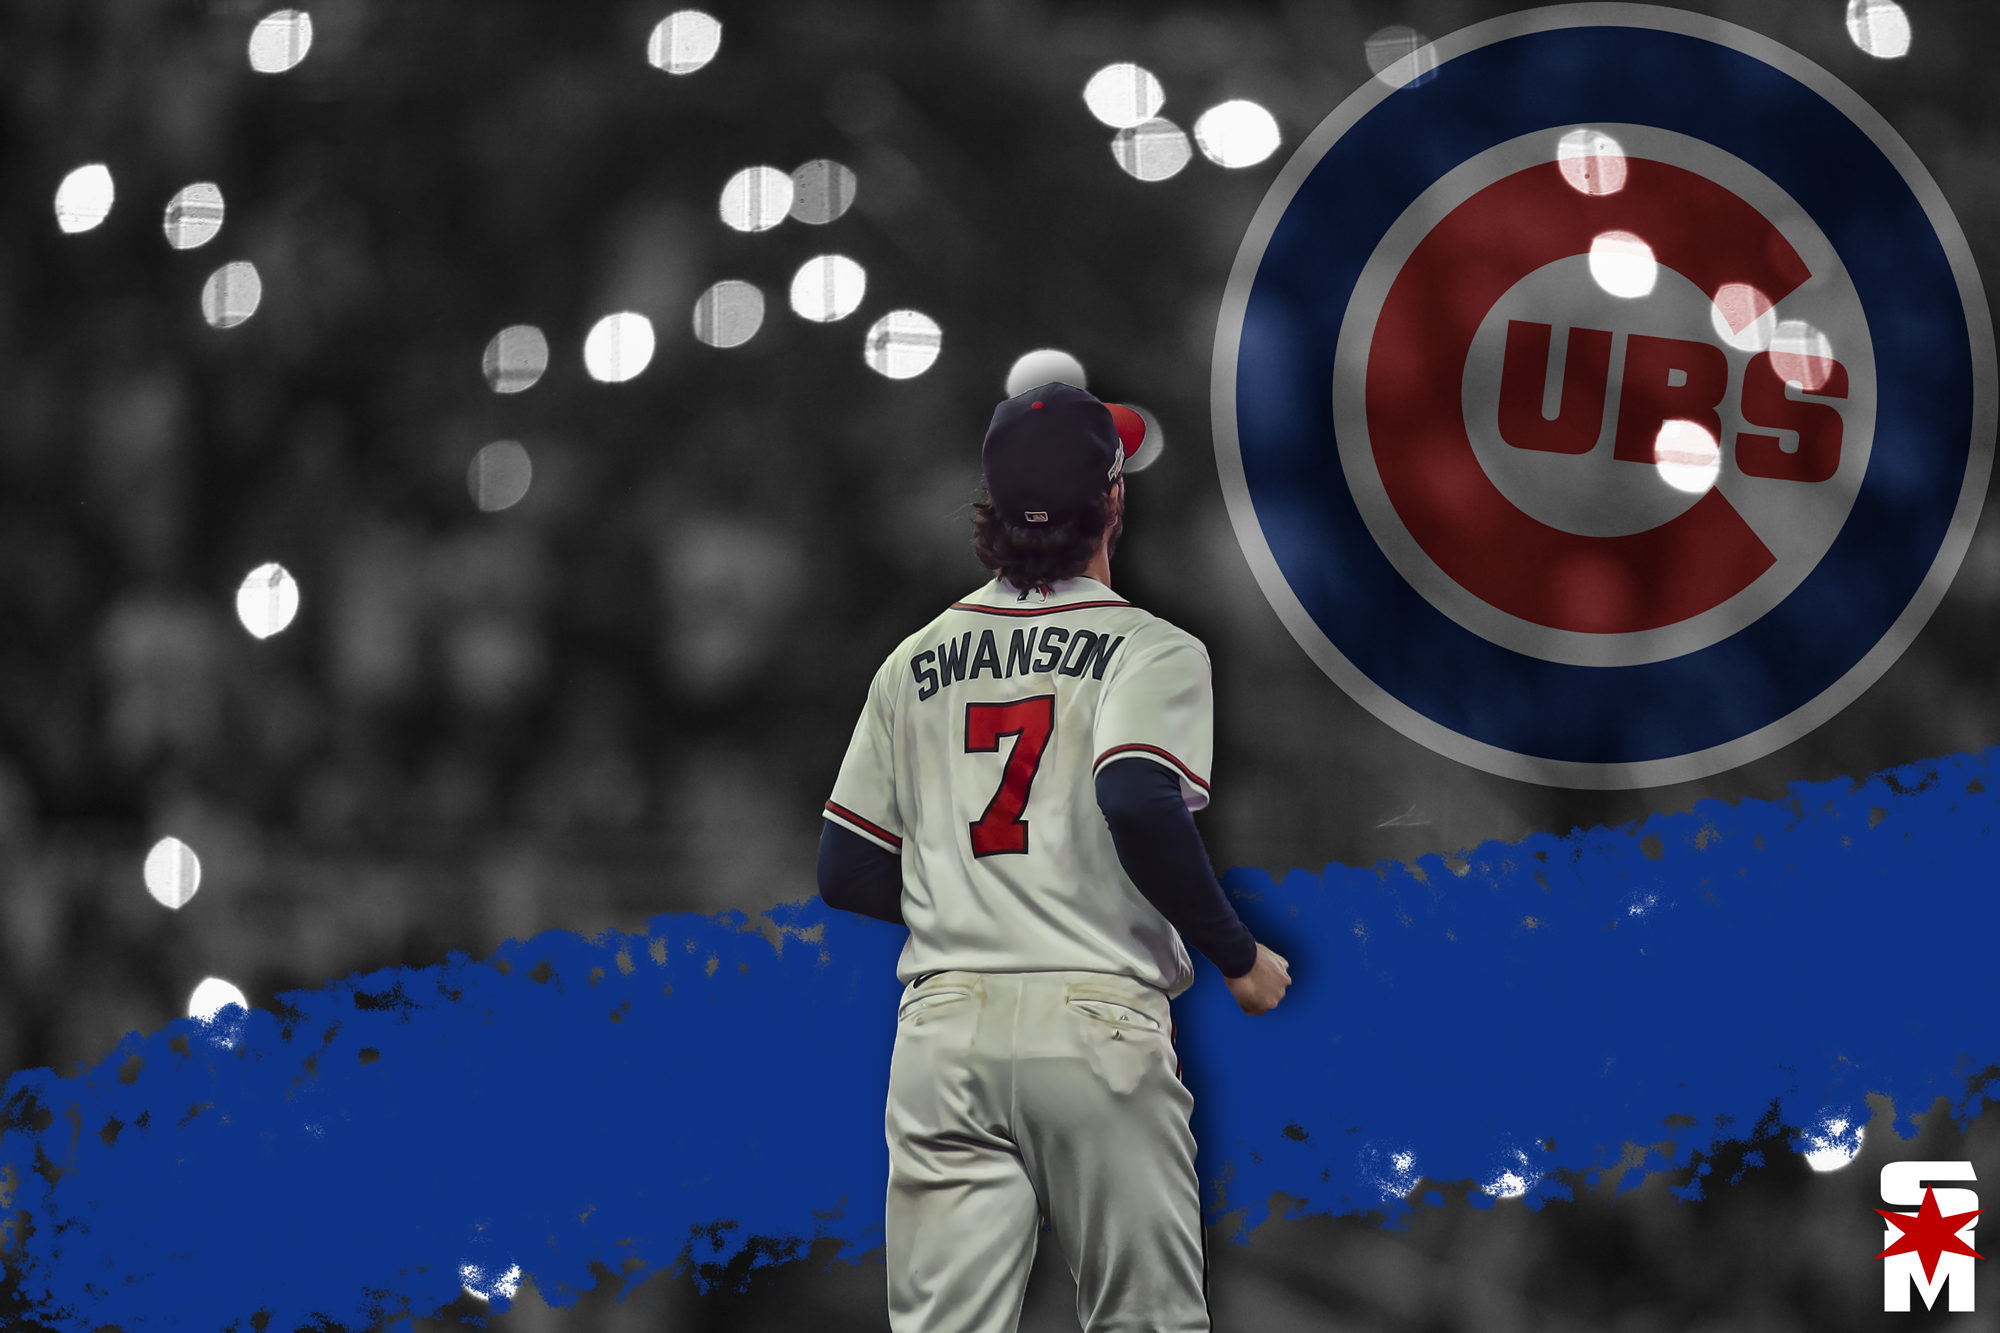 Welcome to the Cubs, Dansby Swanson – Obstructed View